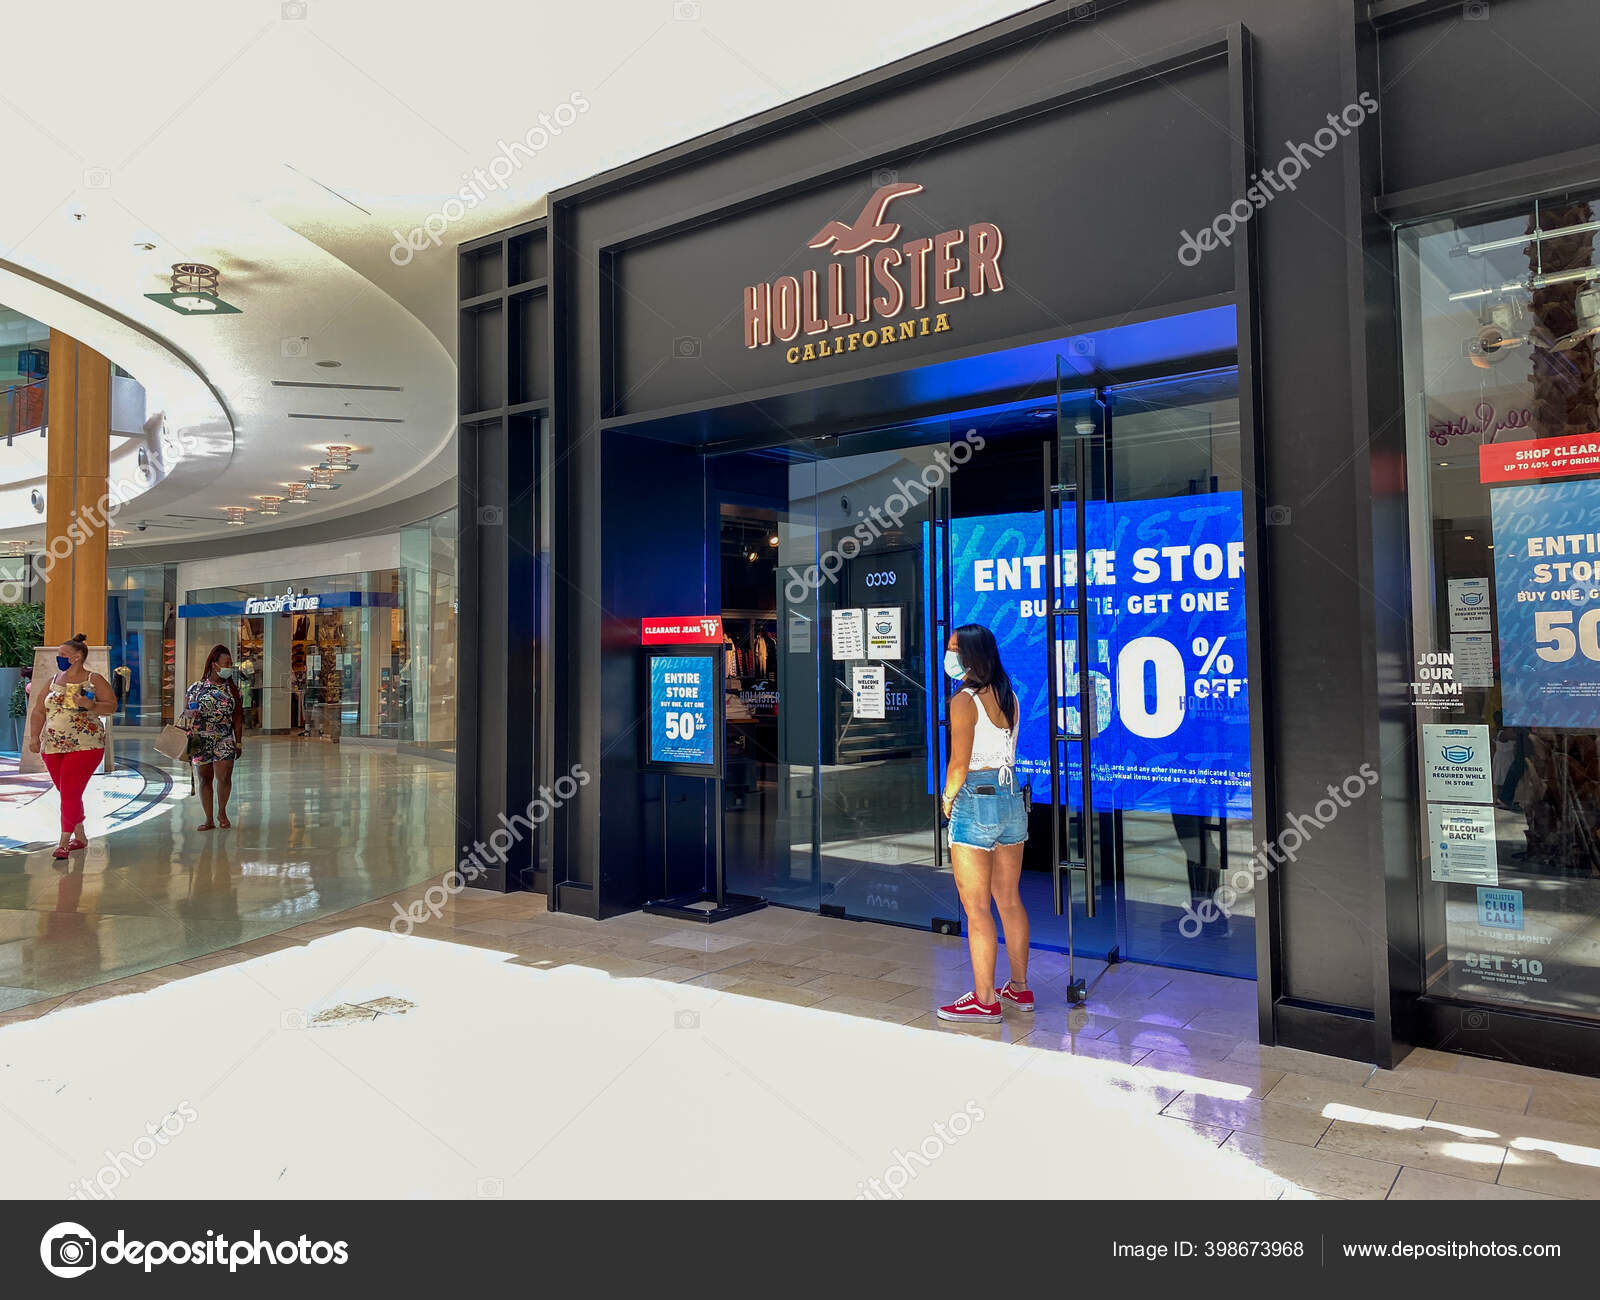 hollister store in india